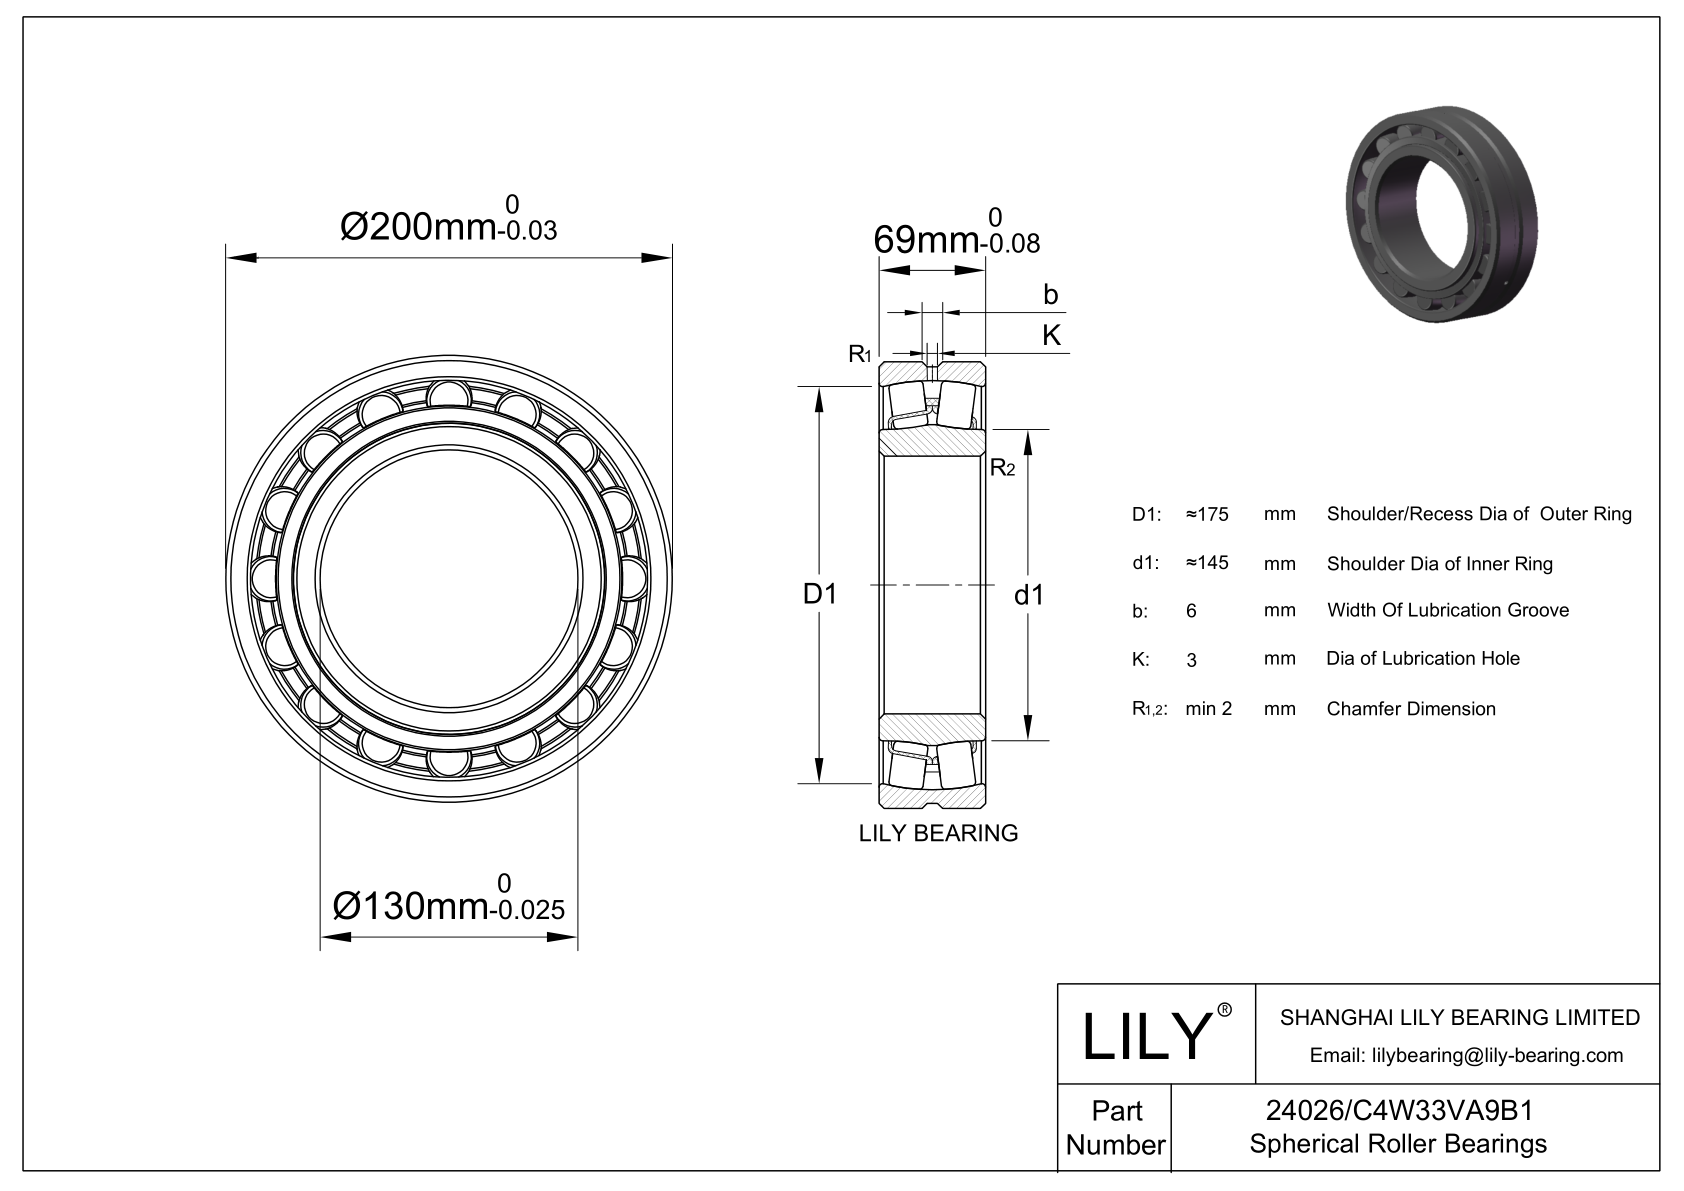 24026/C4W33VA9B1 Double Row Spherical Roller Bearing cad drawing